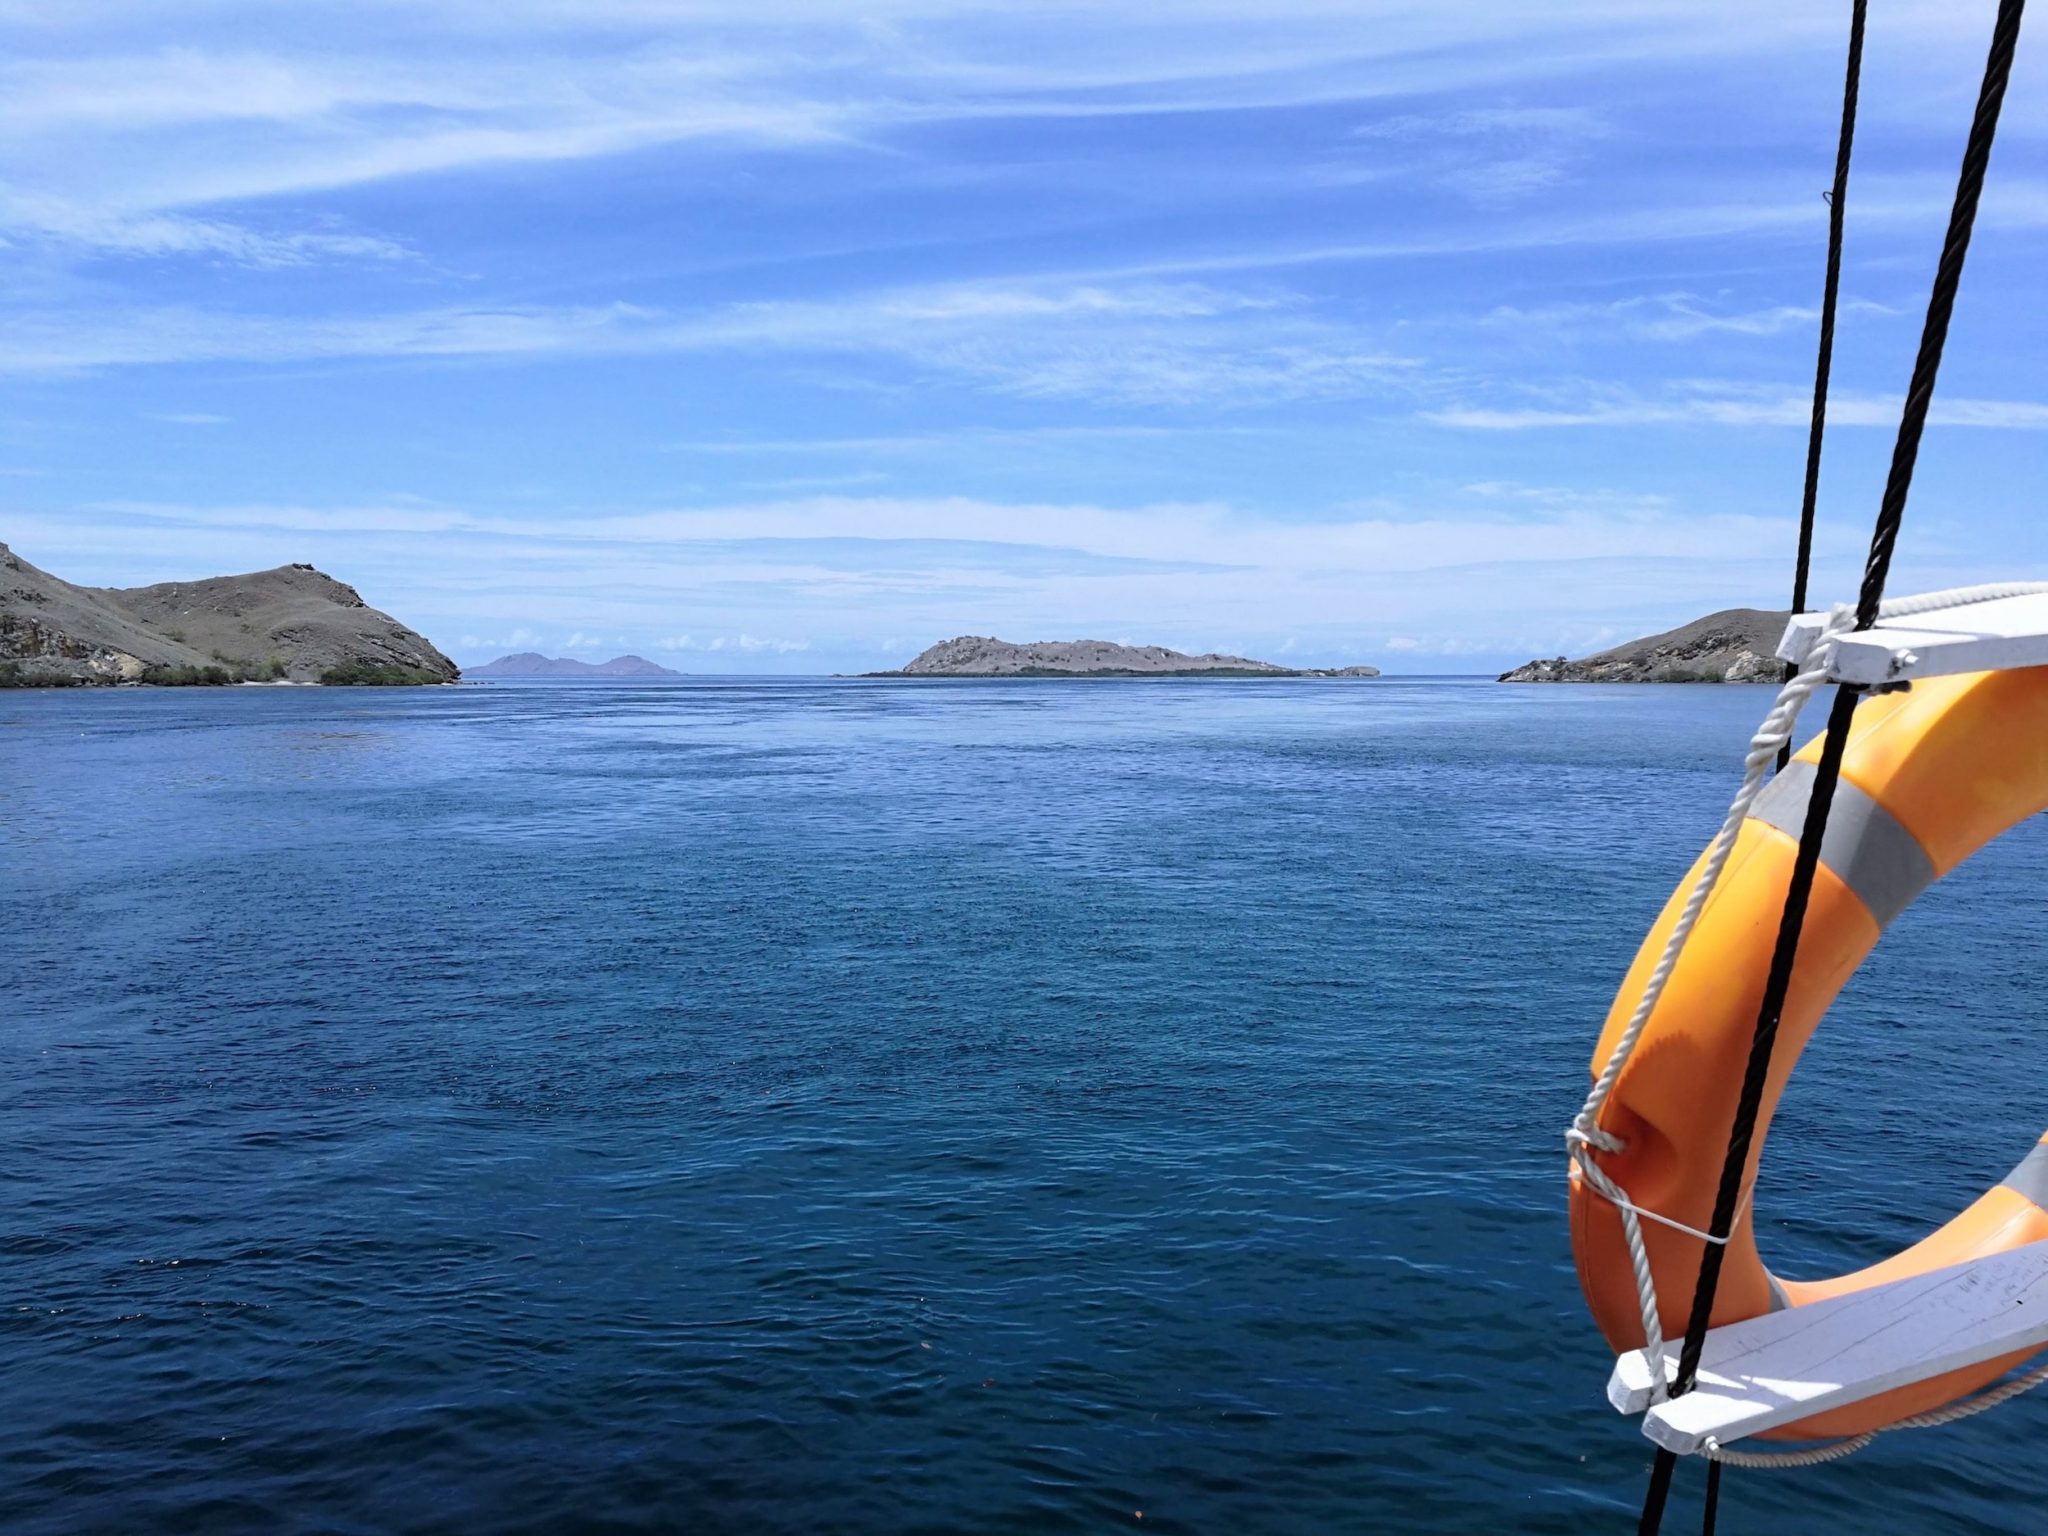 Views of the water and islands from a liveaboard 